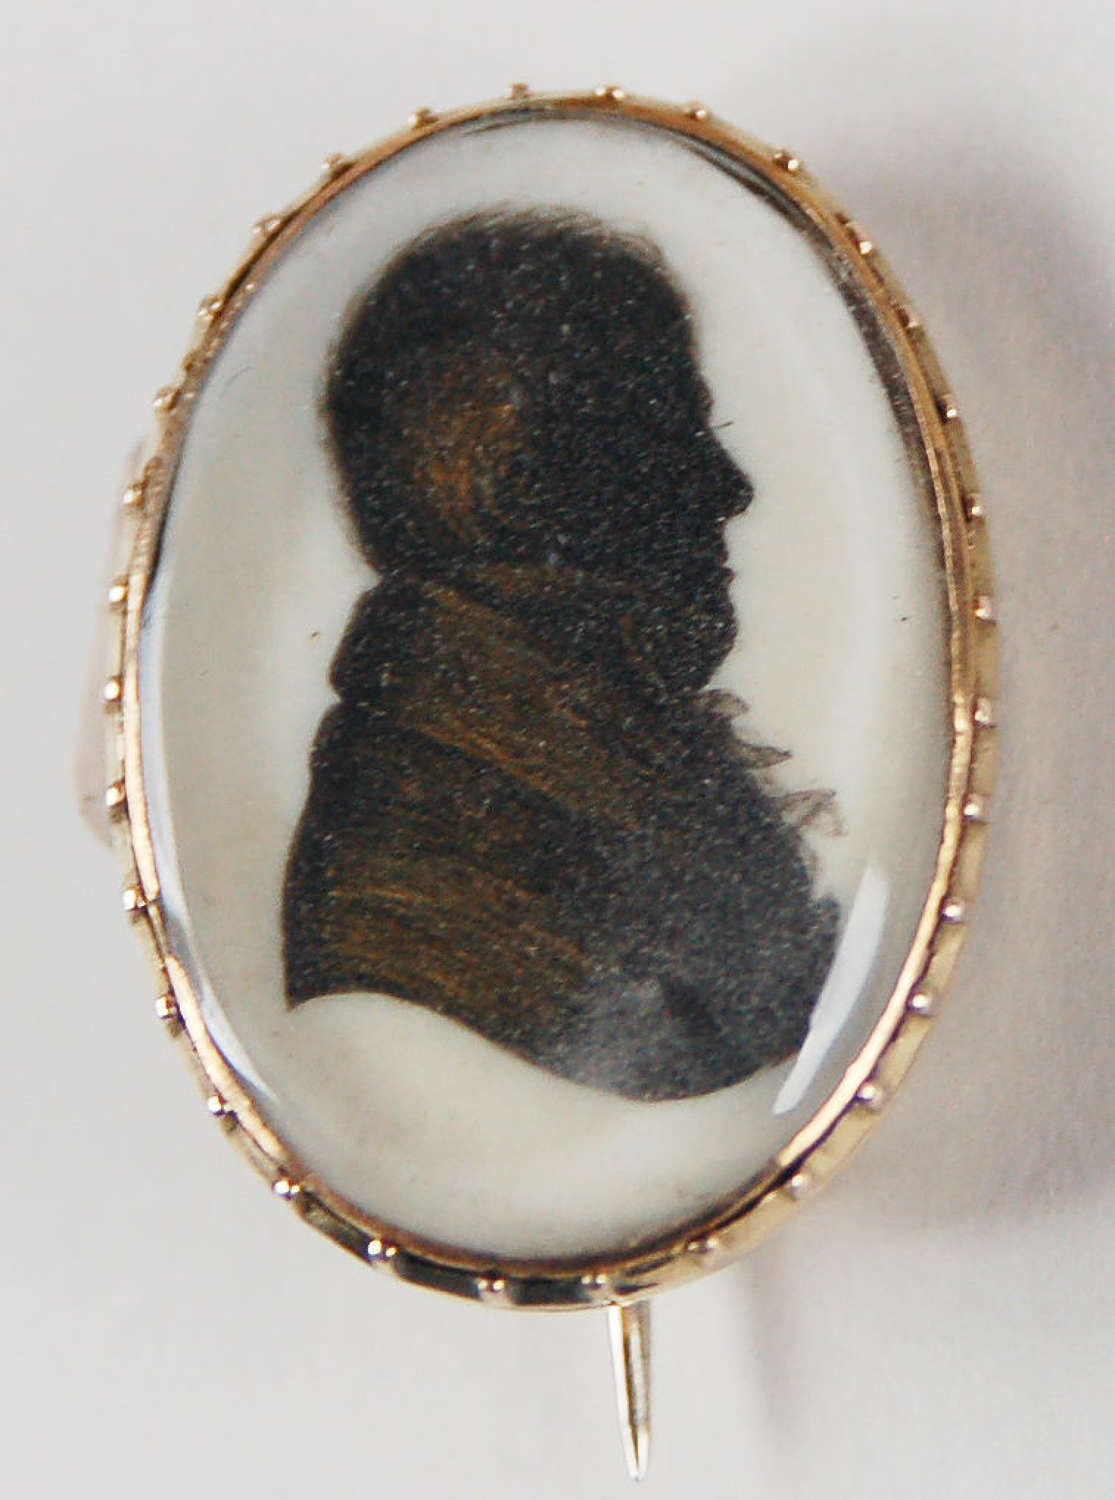 Silhouette attributed to Miers C1800 in gold brooch setting